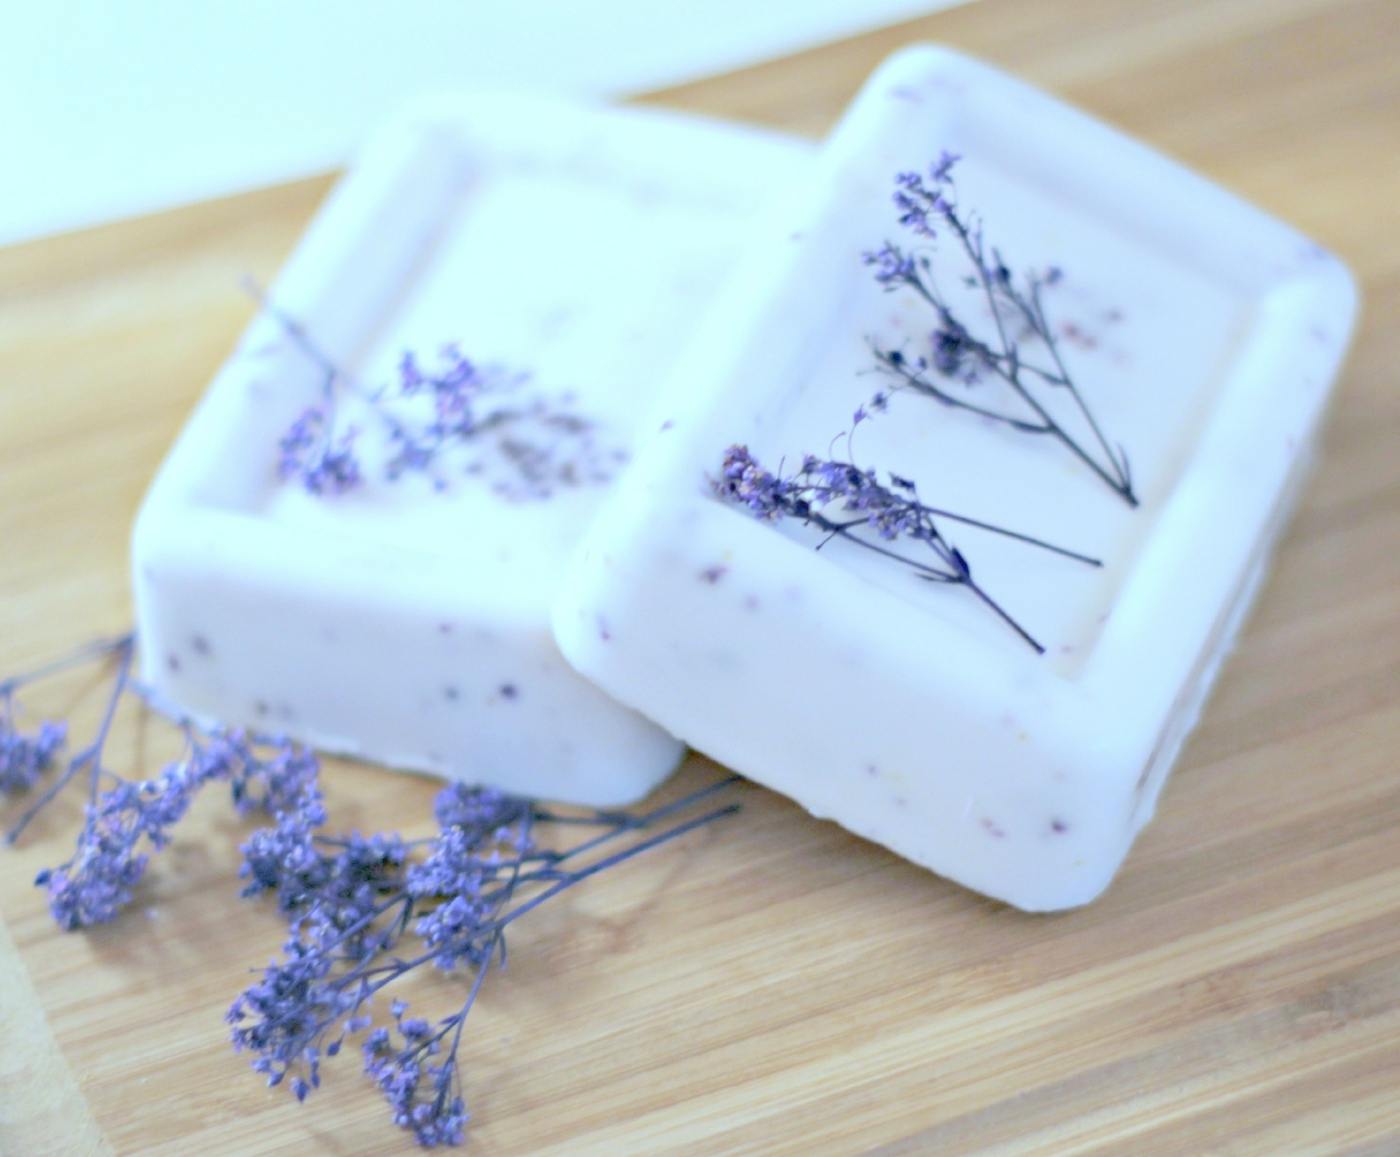 Idea for on the go and on the go - packing soap and saving space